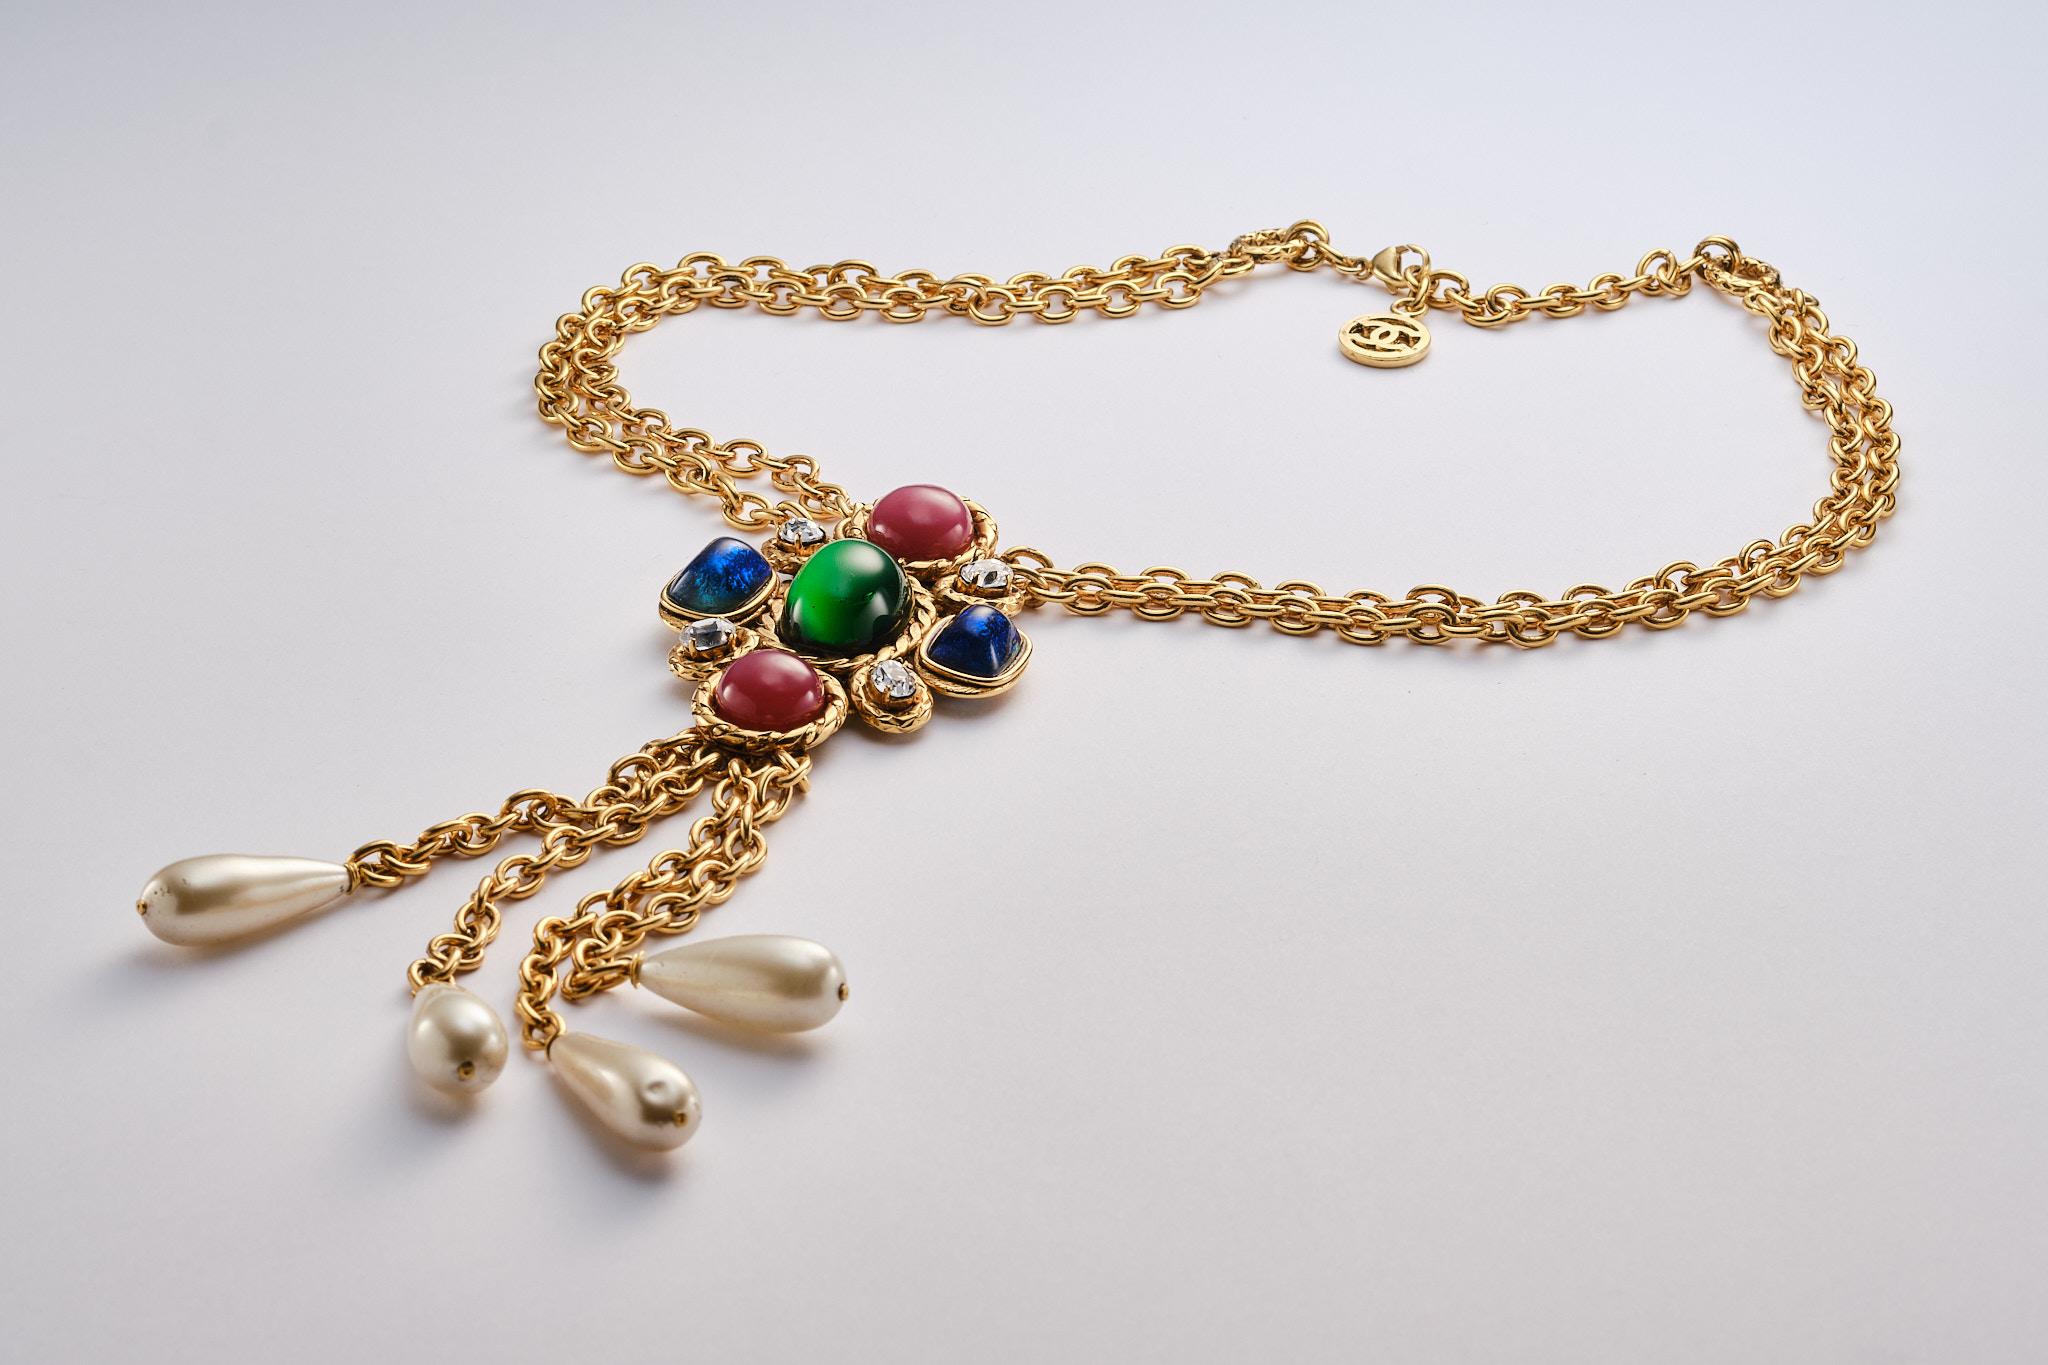 Women's Chanel necklace by R. Goossens and Gripoix Paris signed 2CC8 gold plated For Sale